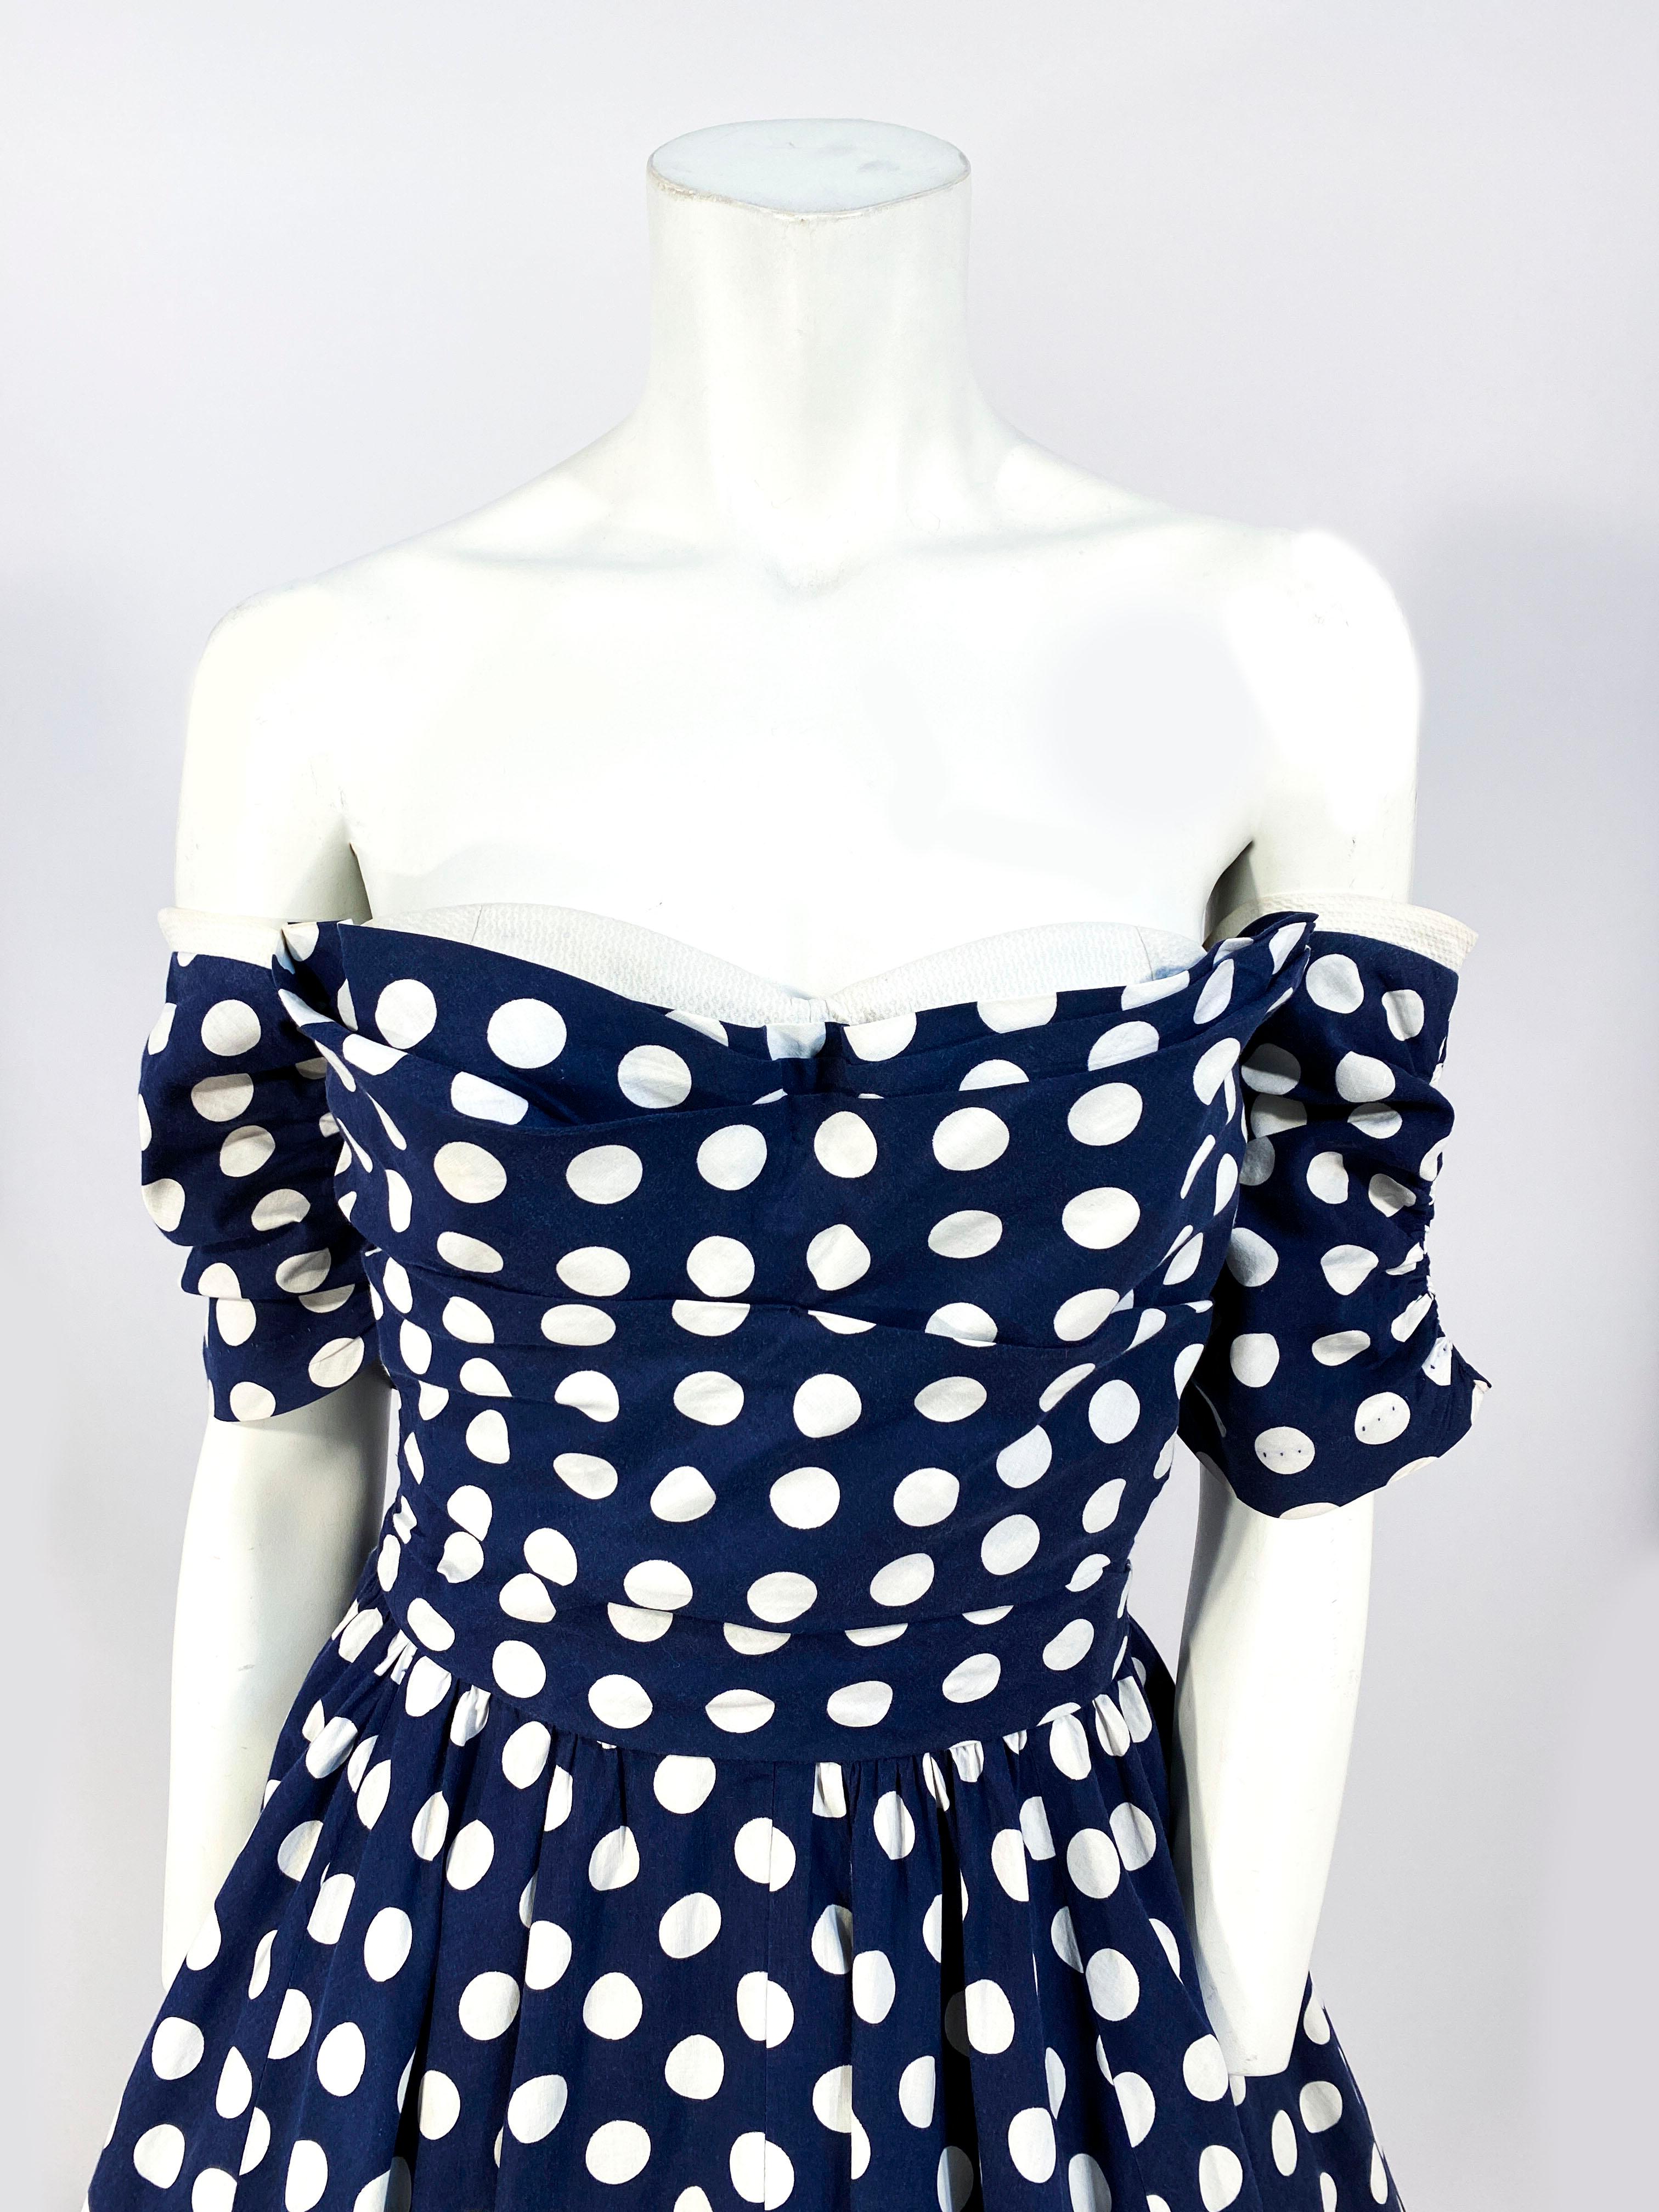 Early 1950s Navy and white polkadot summer party dress with removable off the shoulder sleeves to make this dress entirely strapless. The bodice is finished with a white pique panel to match this trim on the sleeves. The skirt is full and is